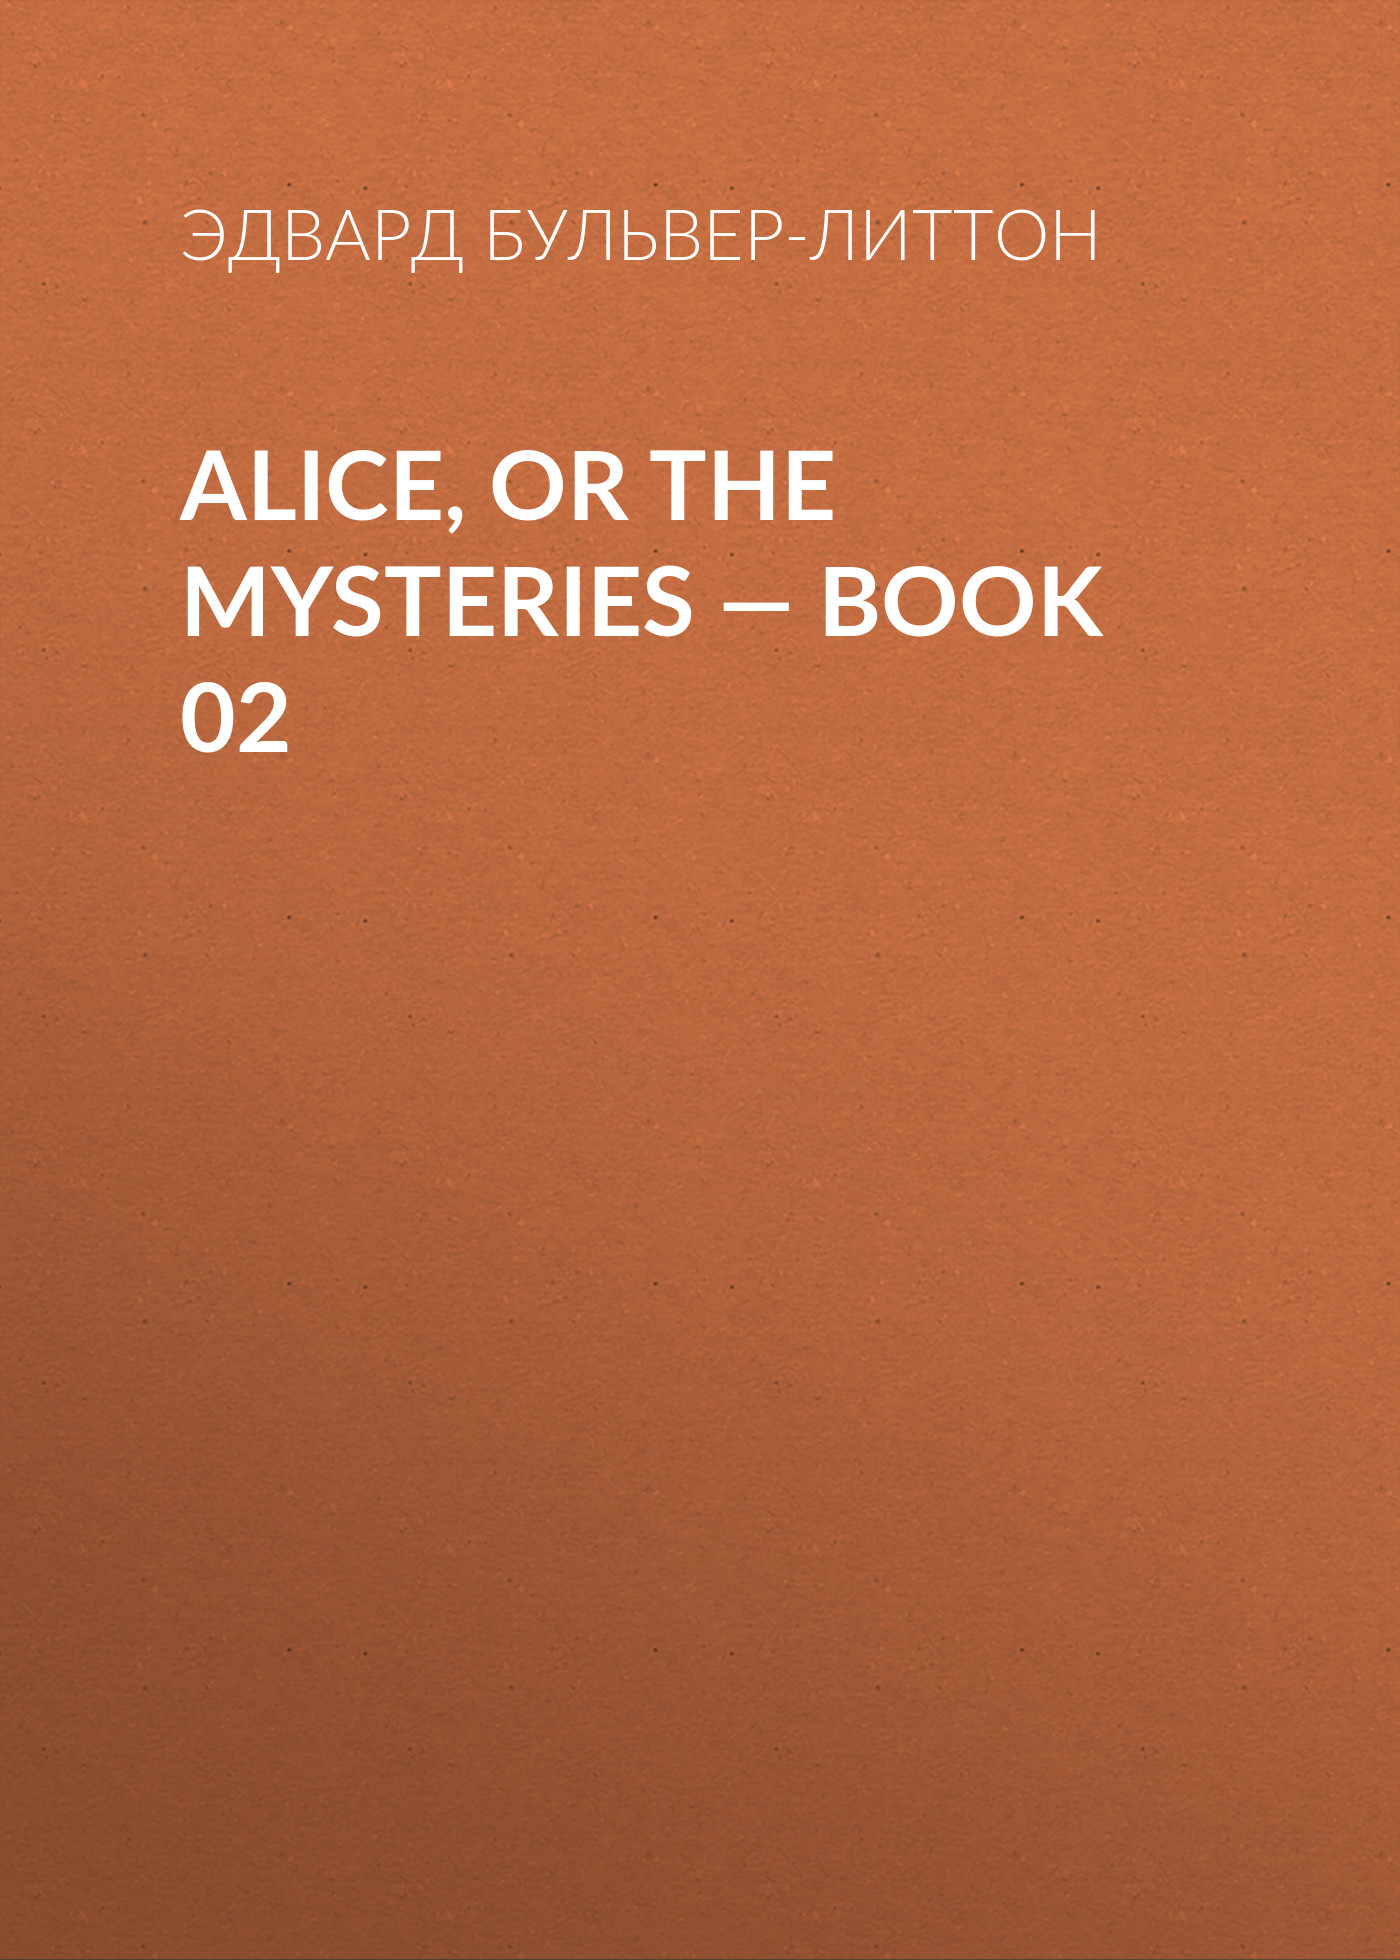 Alice, or the Mysteries— Book 02